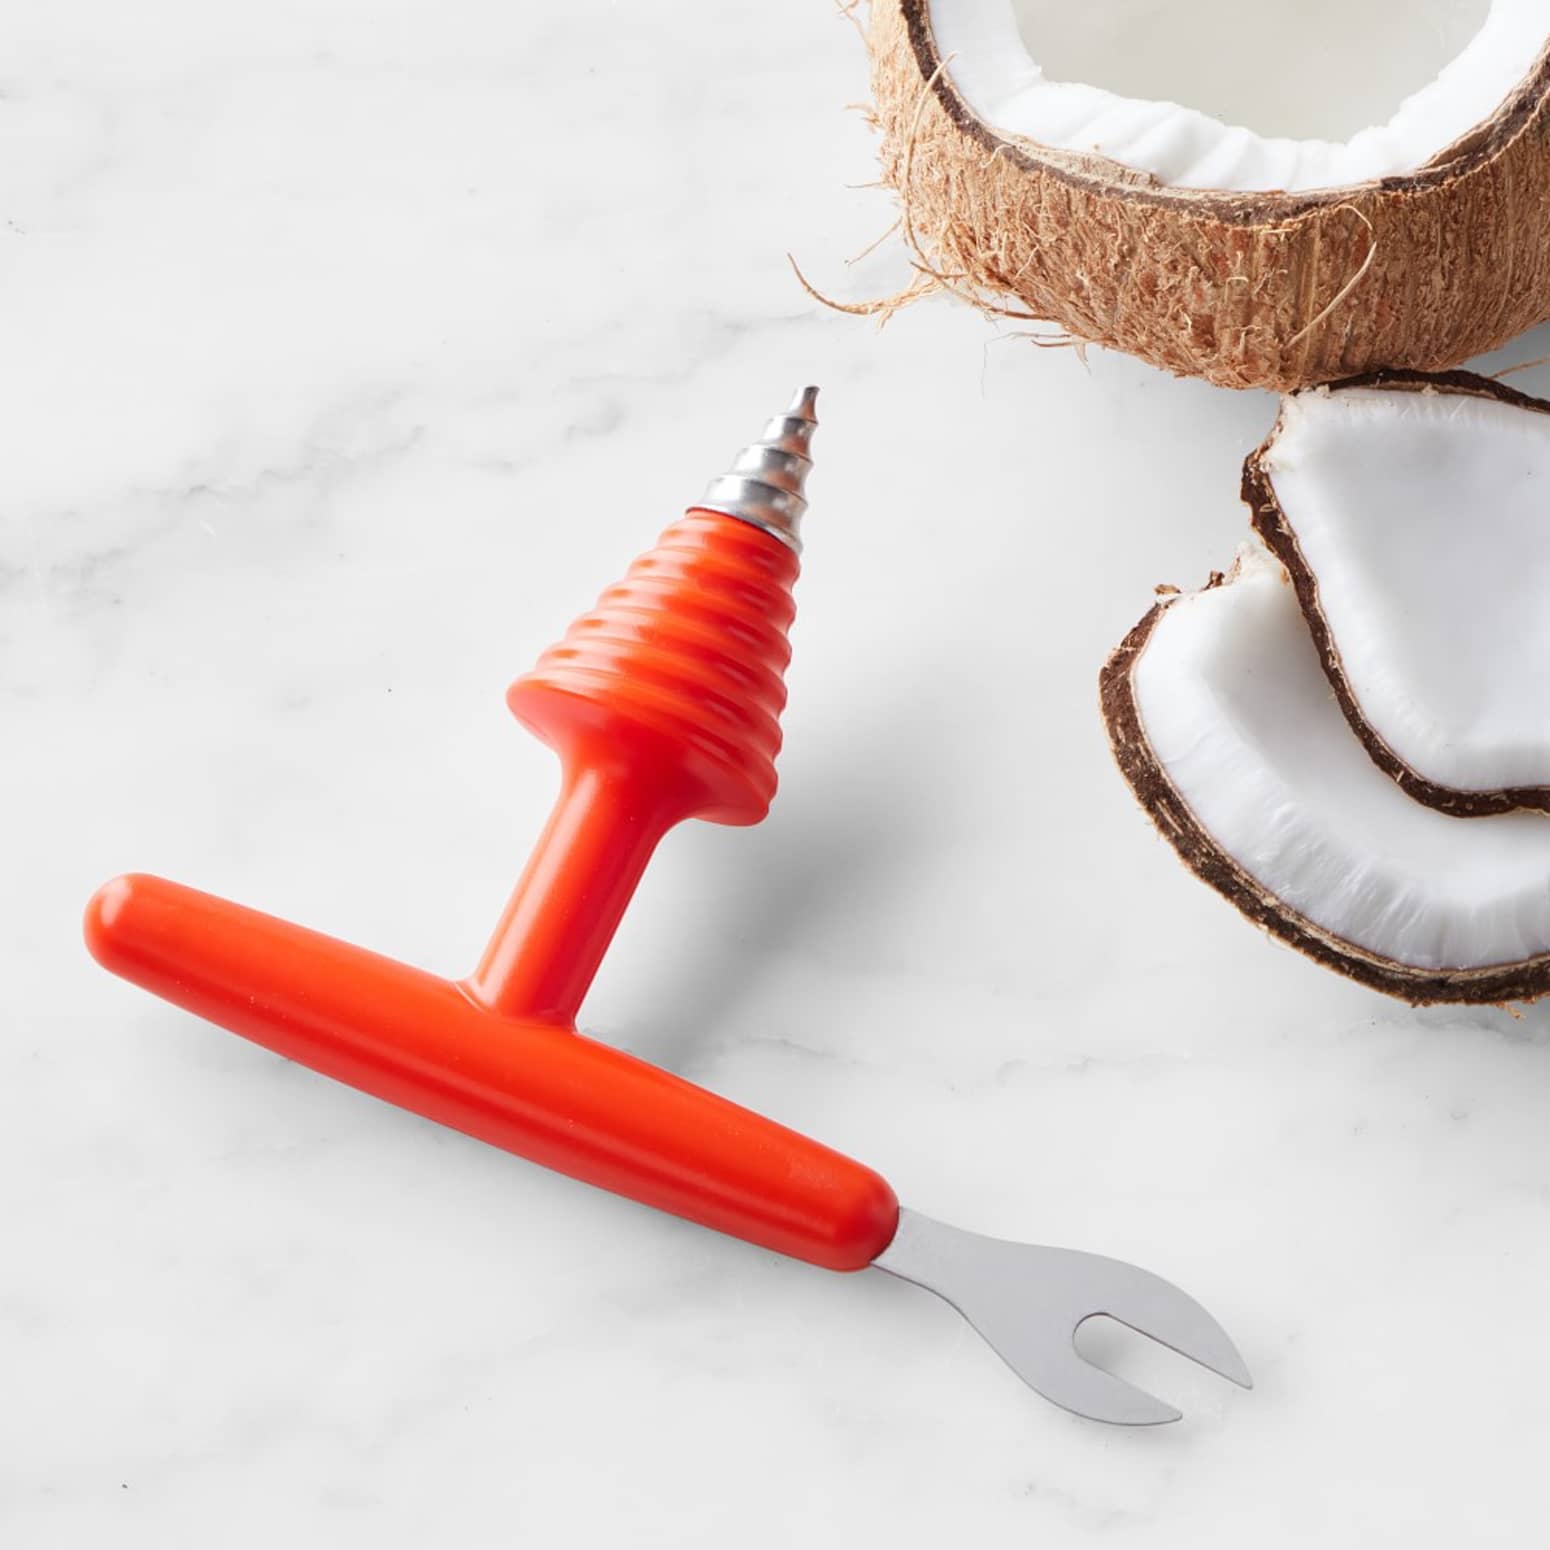 Cococrack - Coconut Opener and Cutting Tool